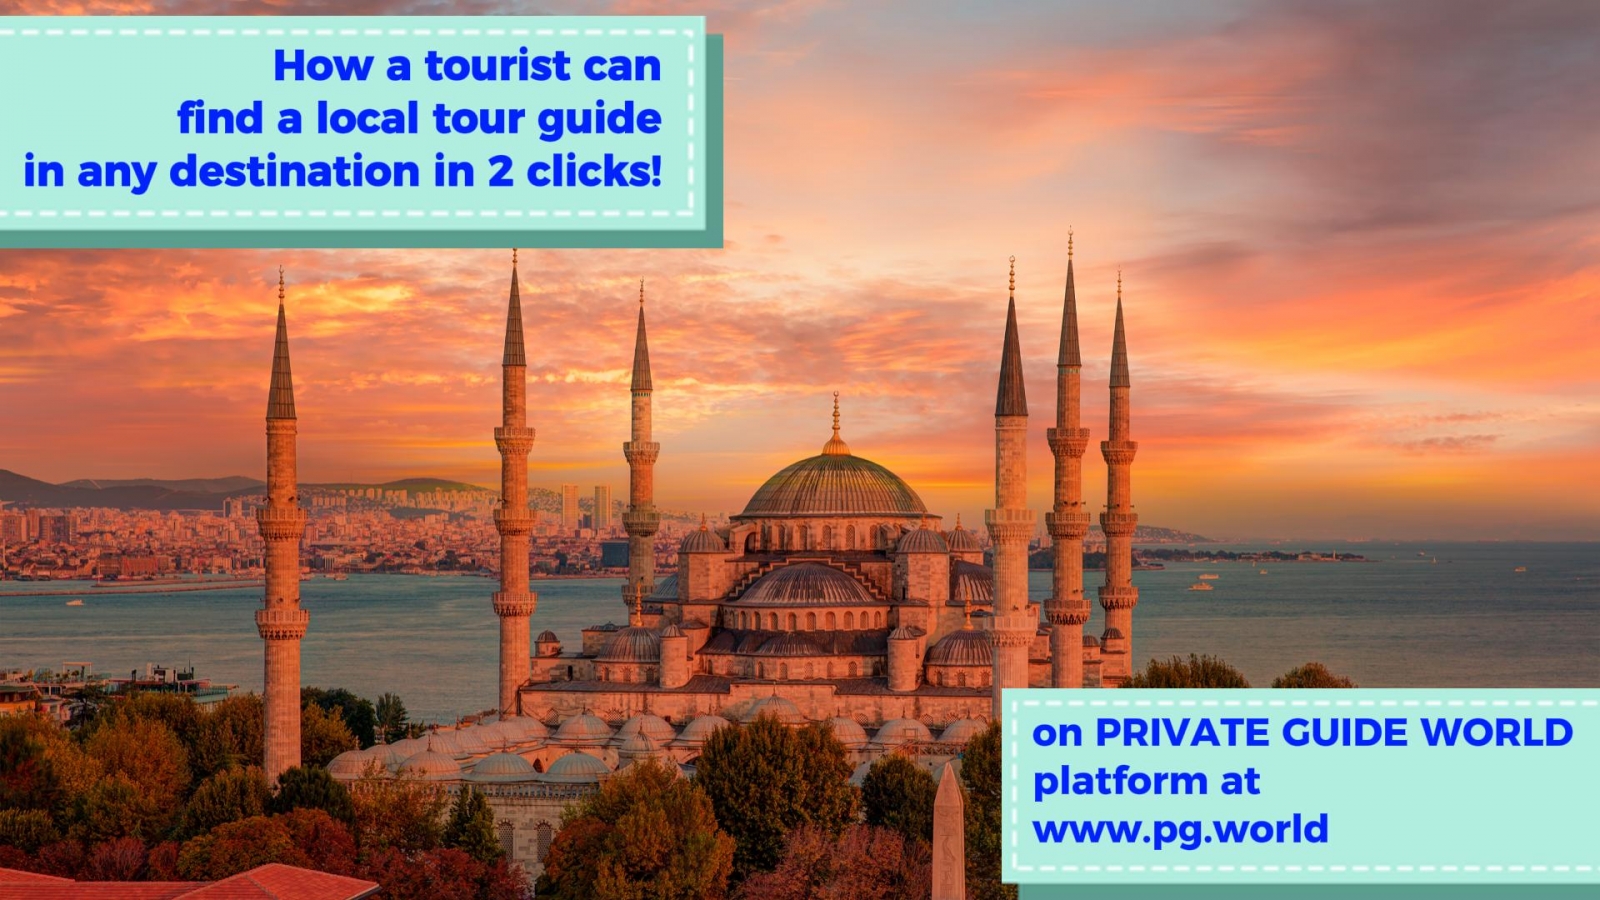 How a tourist can find a tour guide in 2 clicks